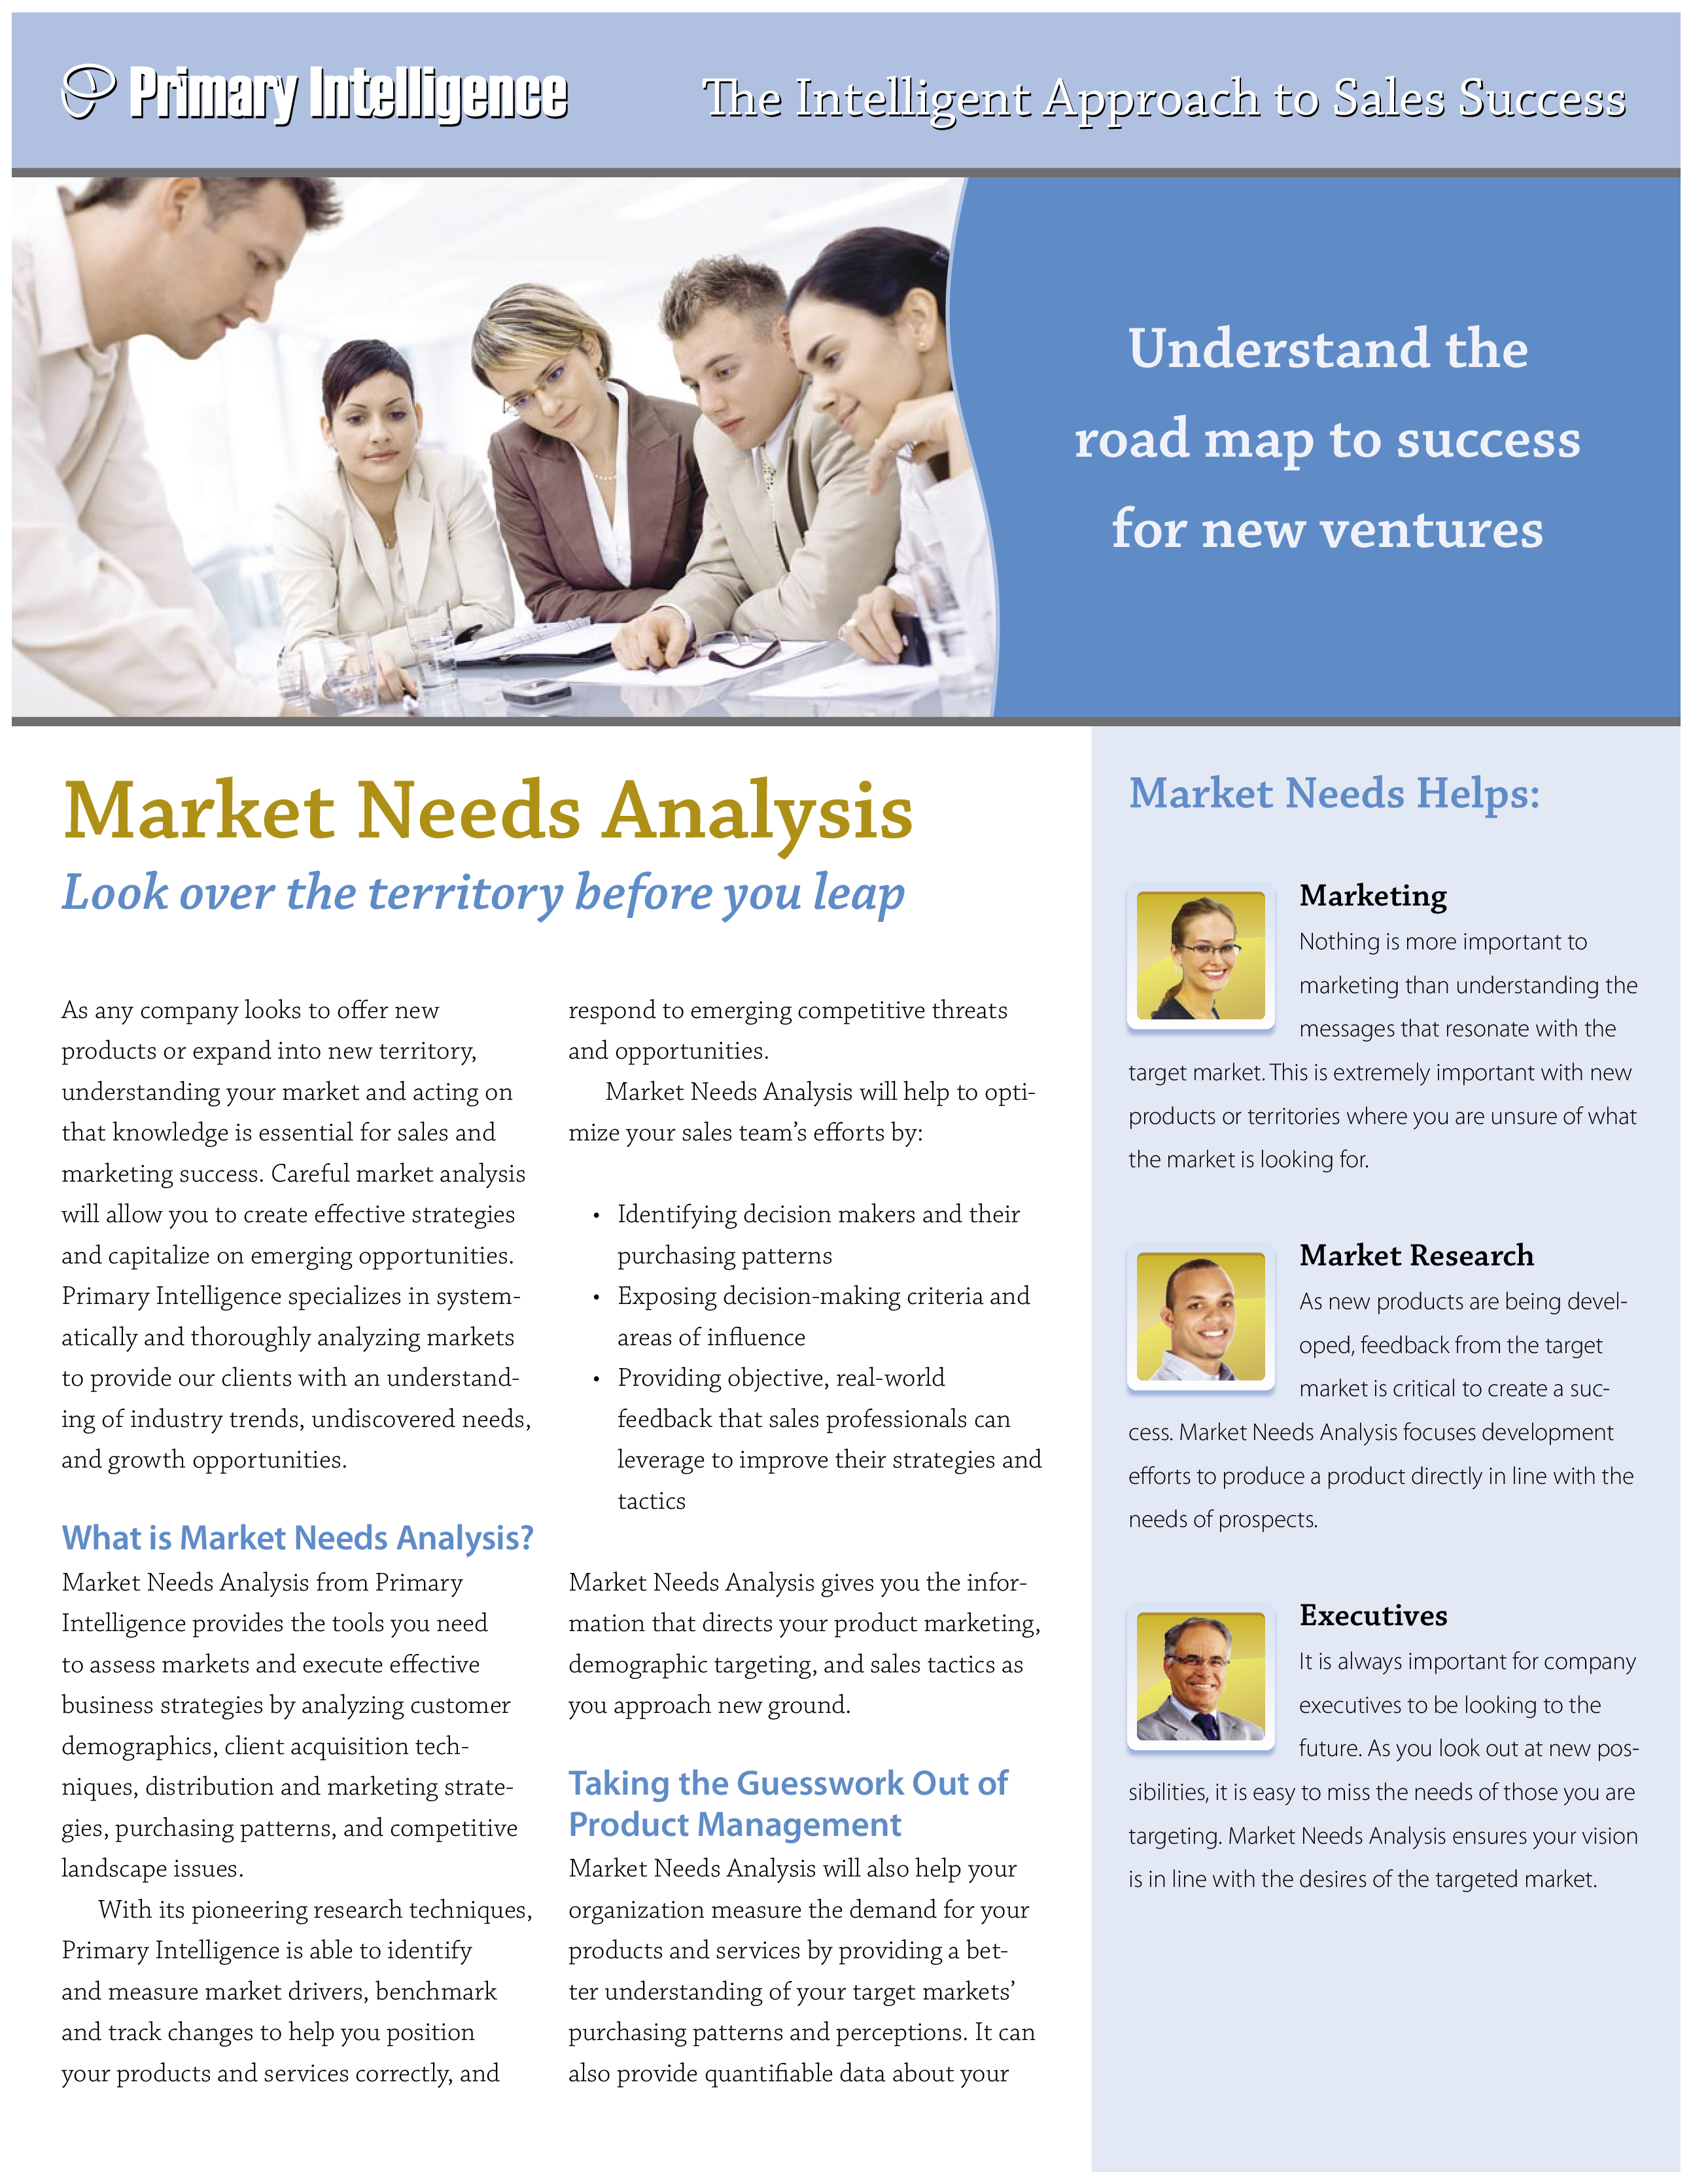 what is market needs in business plan